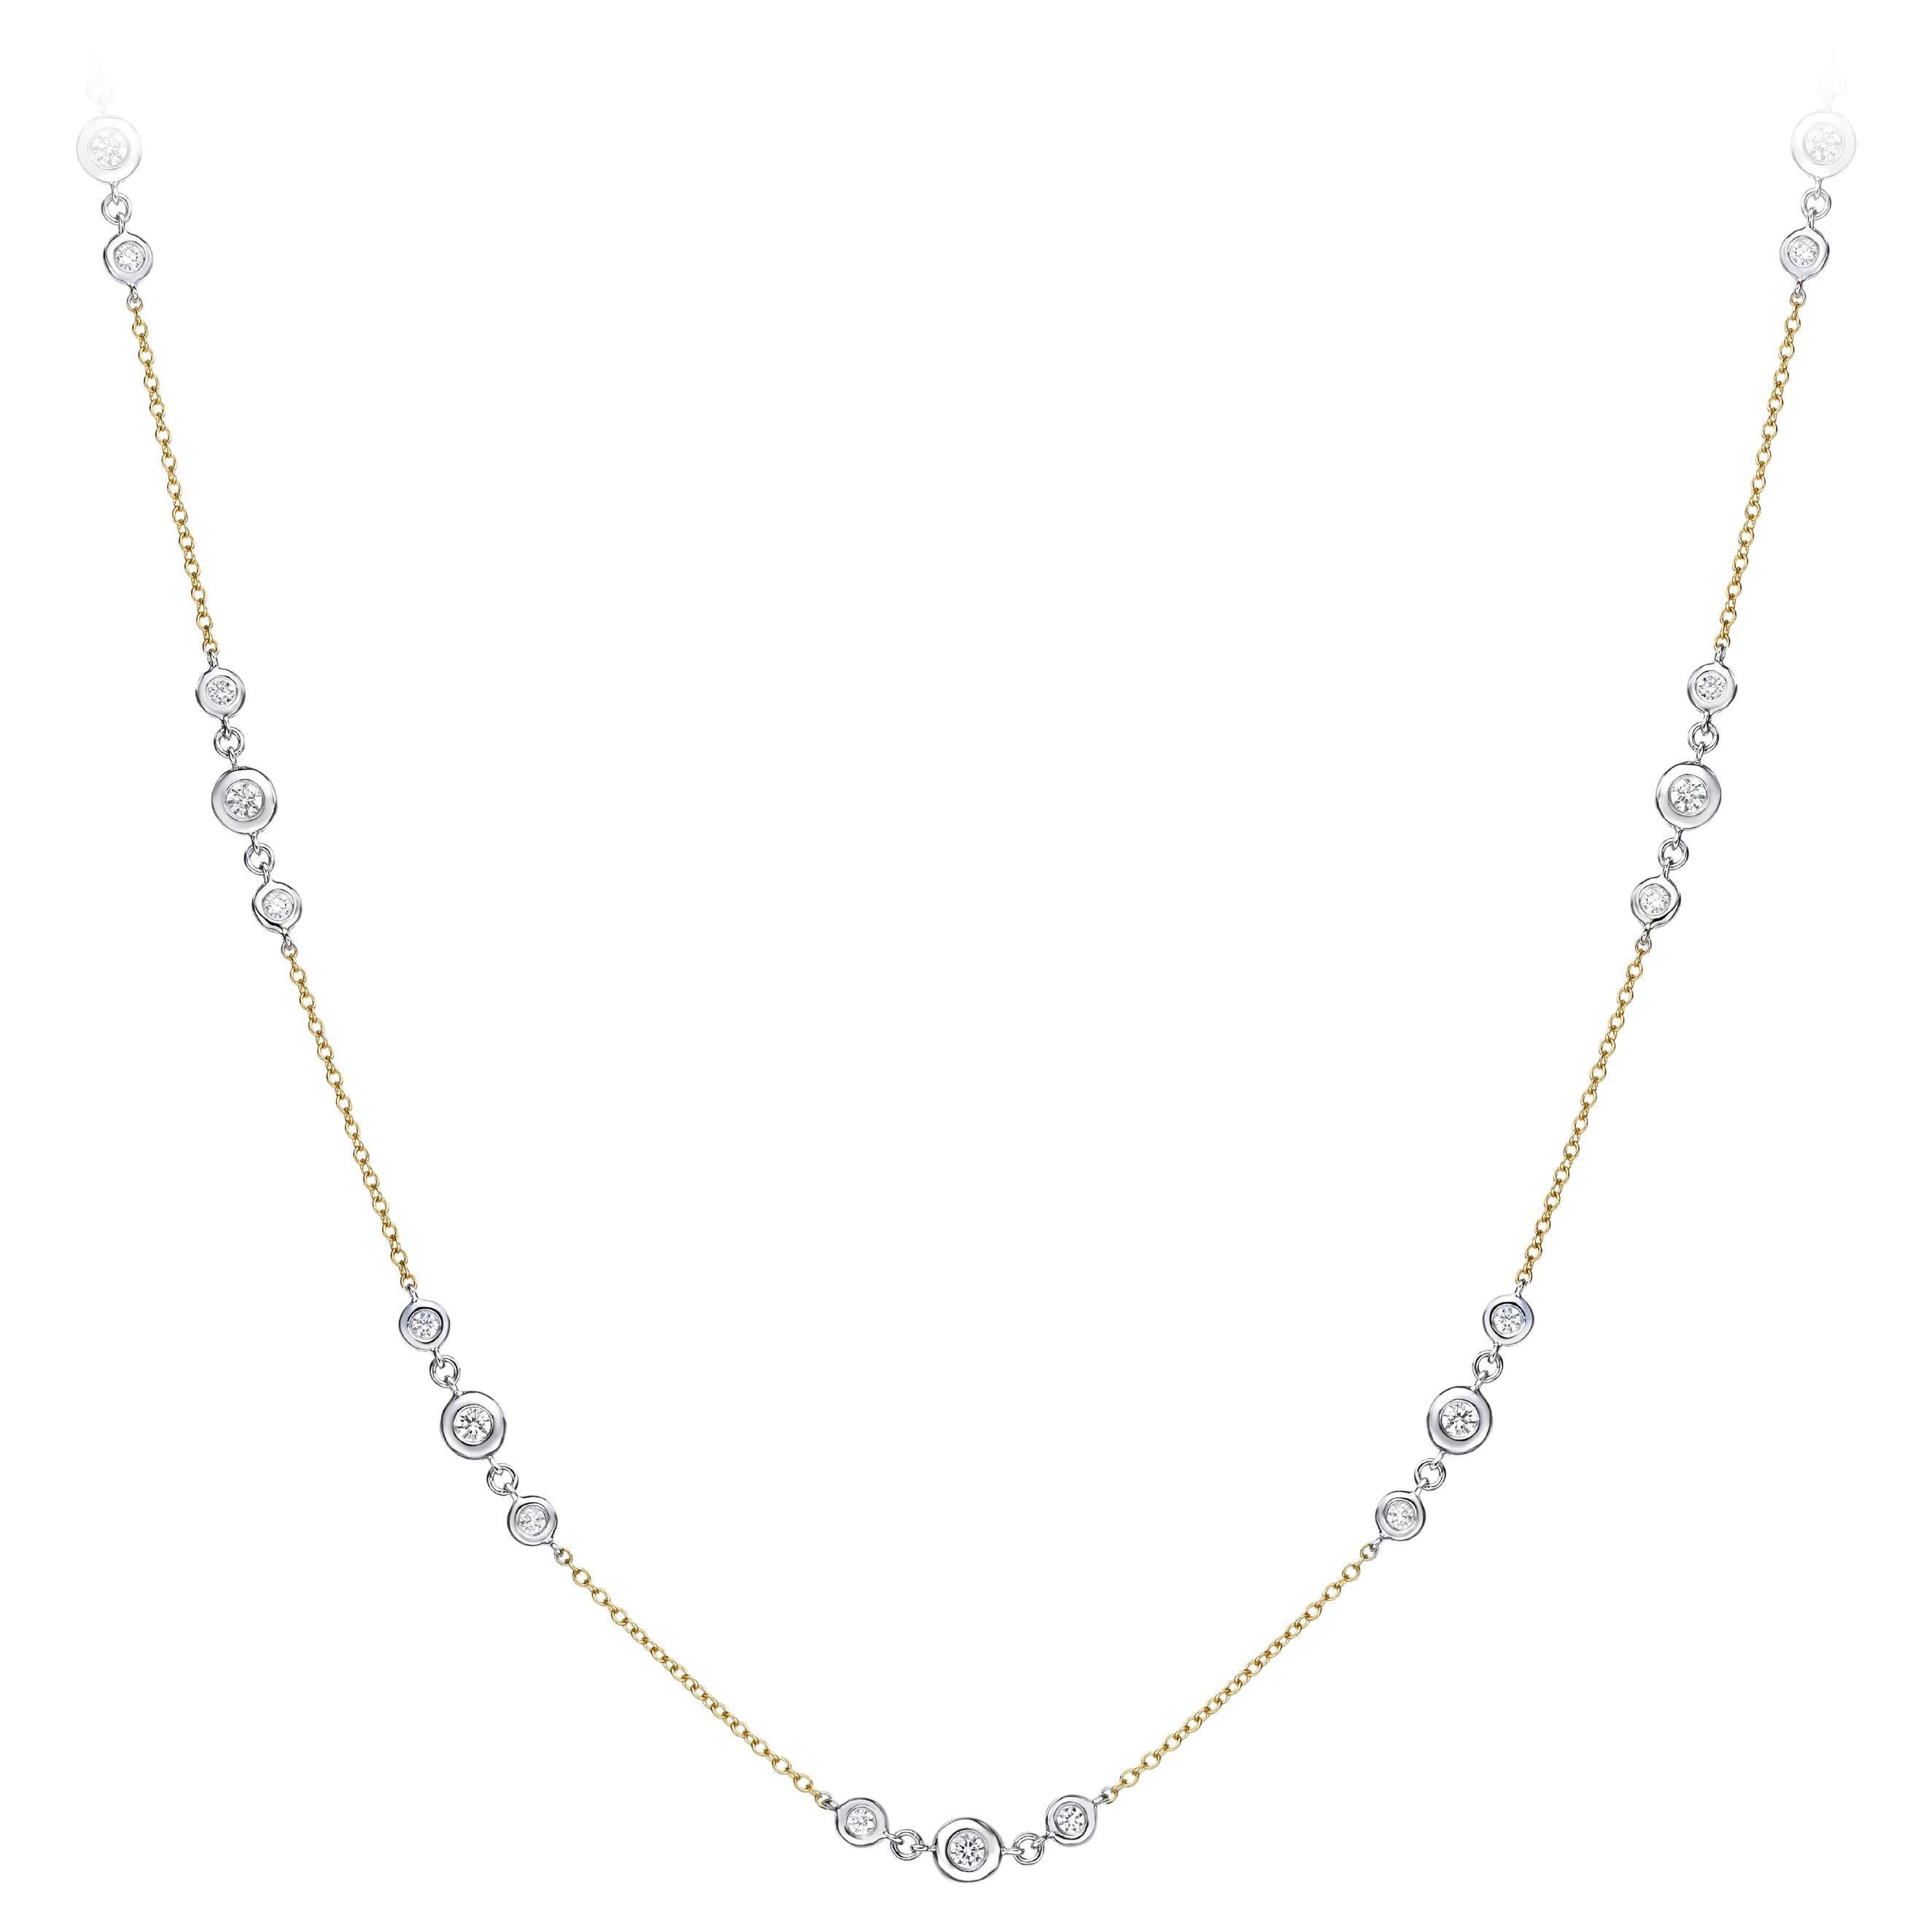 GILIN 18K White Yellow Gold Diamond Necklace For Sale